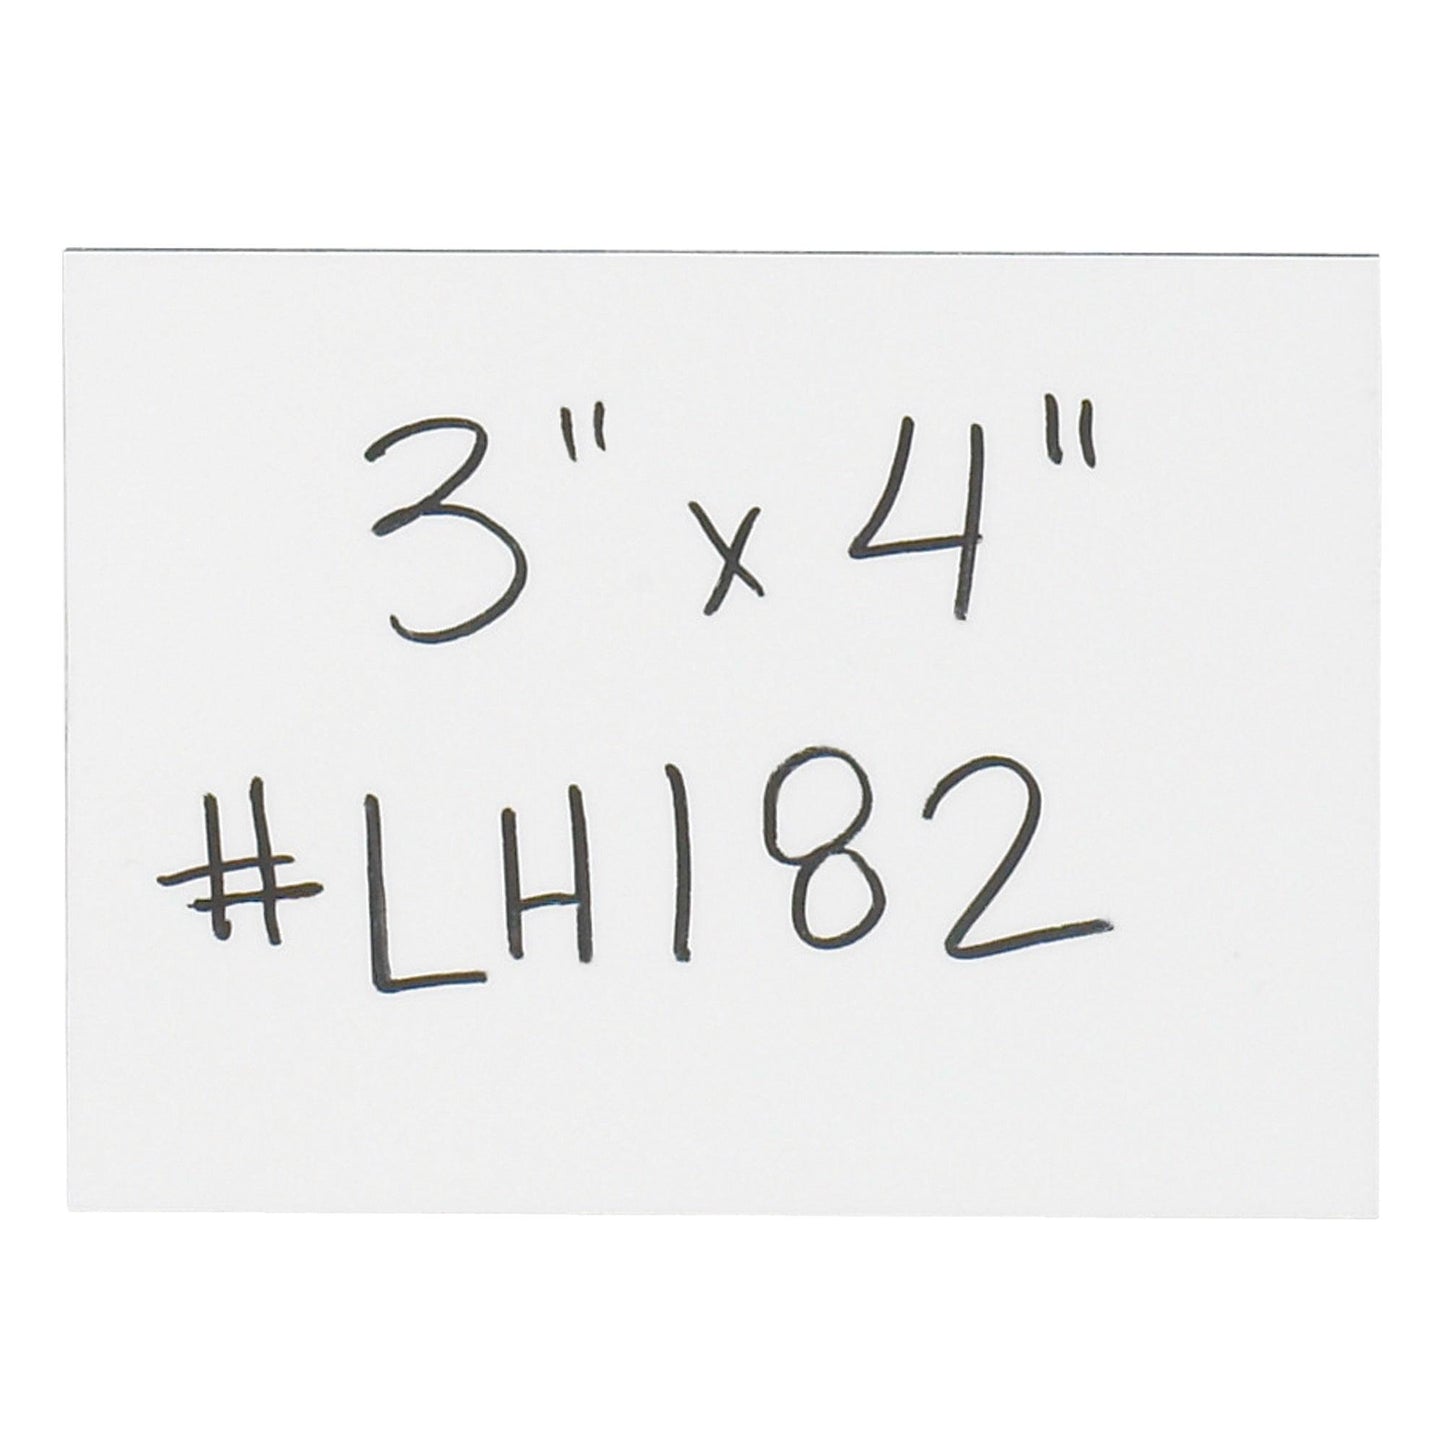 3 x 4" White Warehouse Labels - Magnetic Strips - LH182